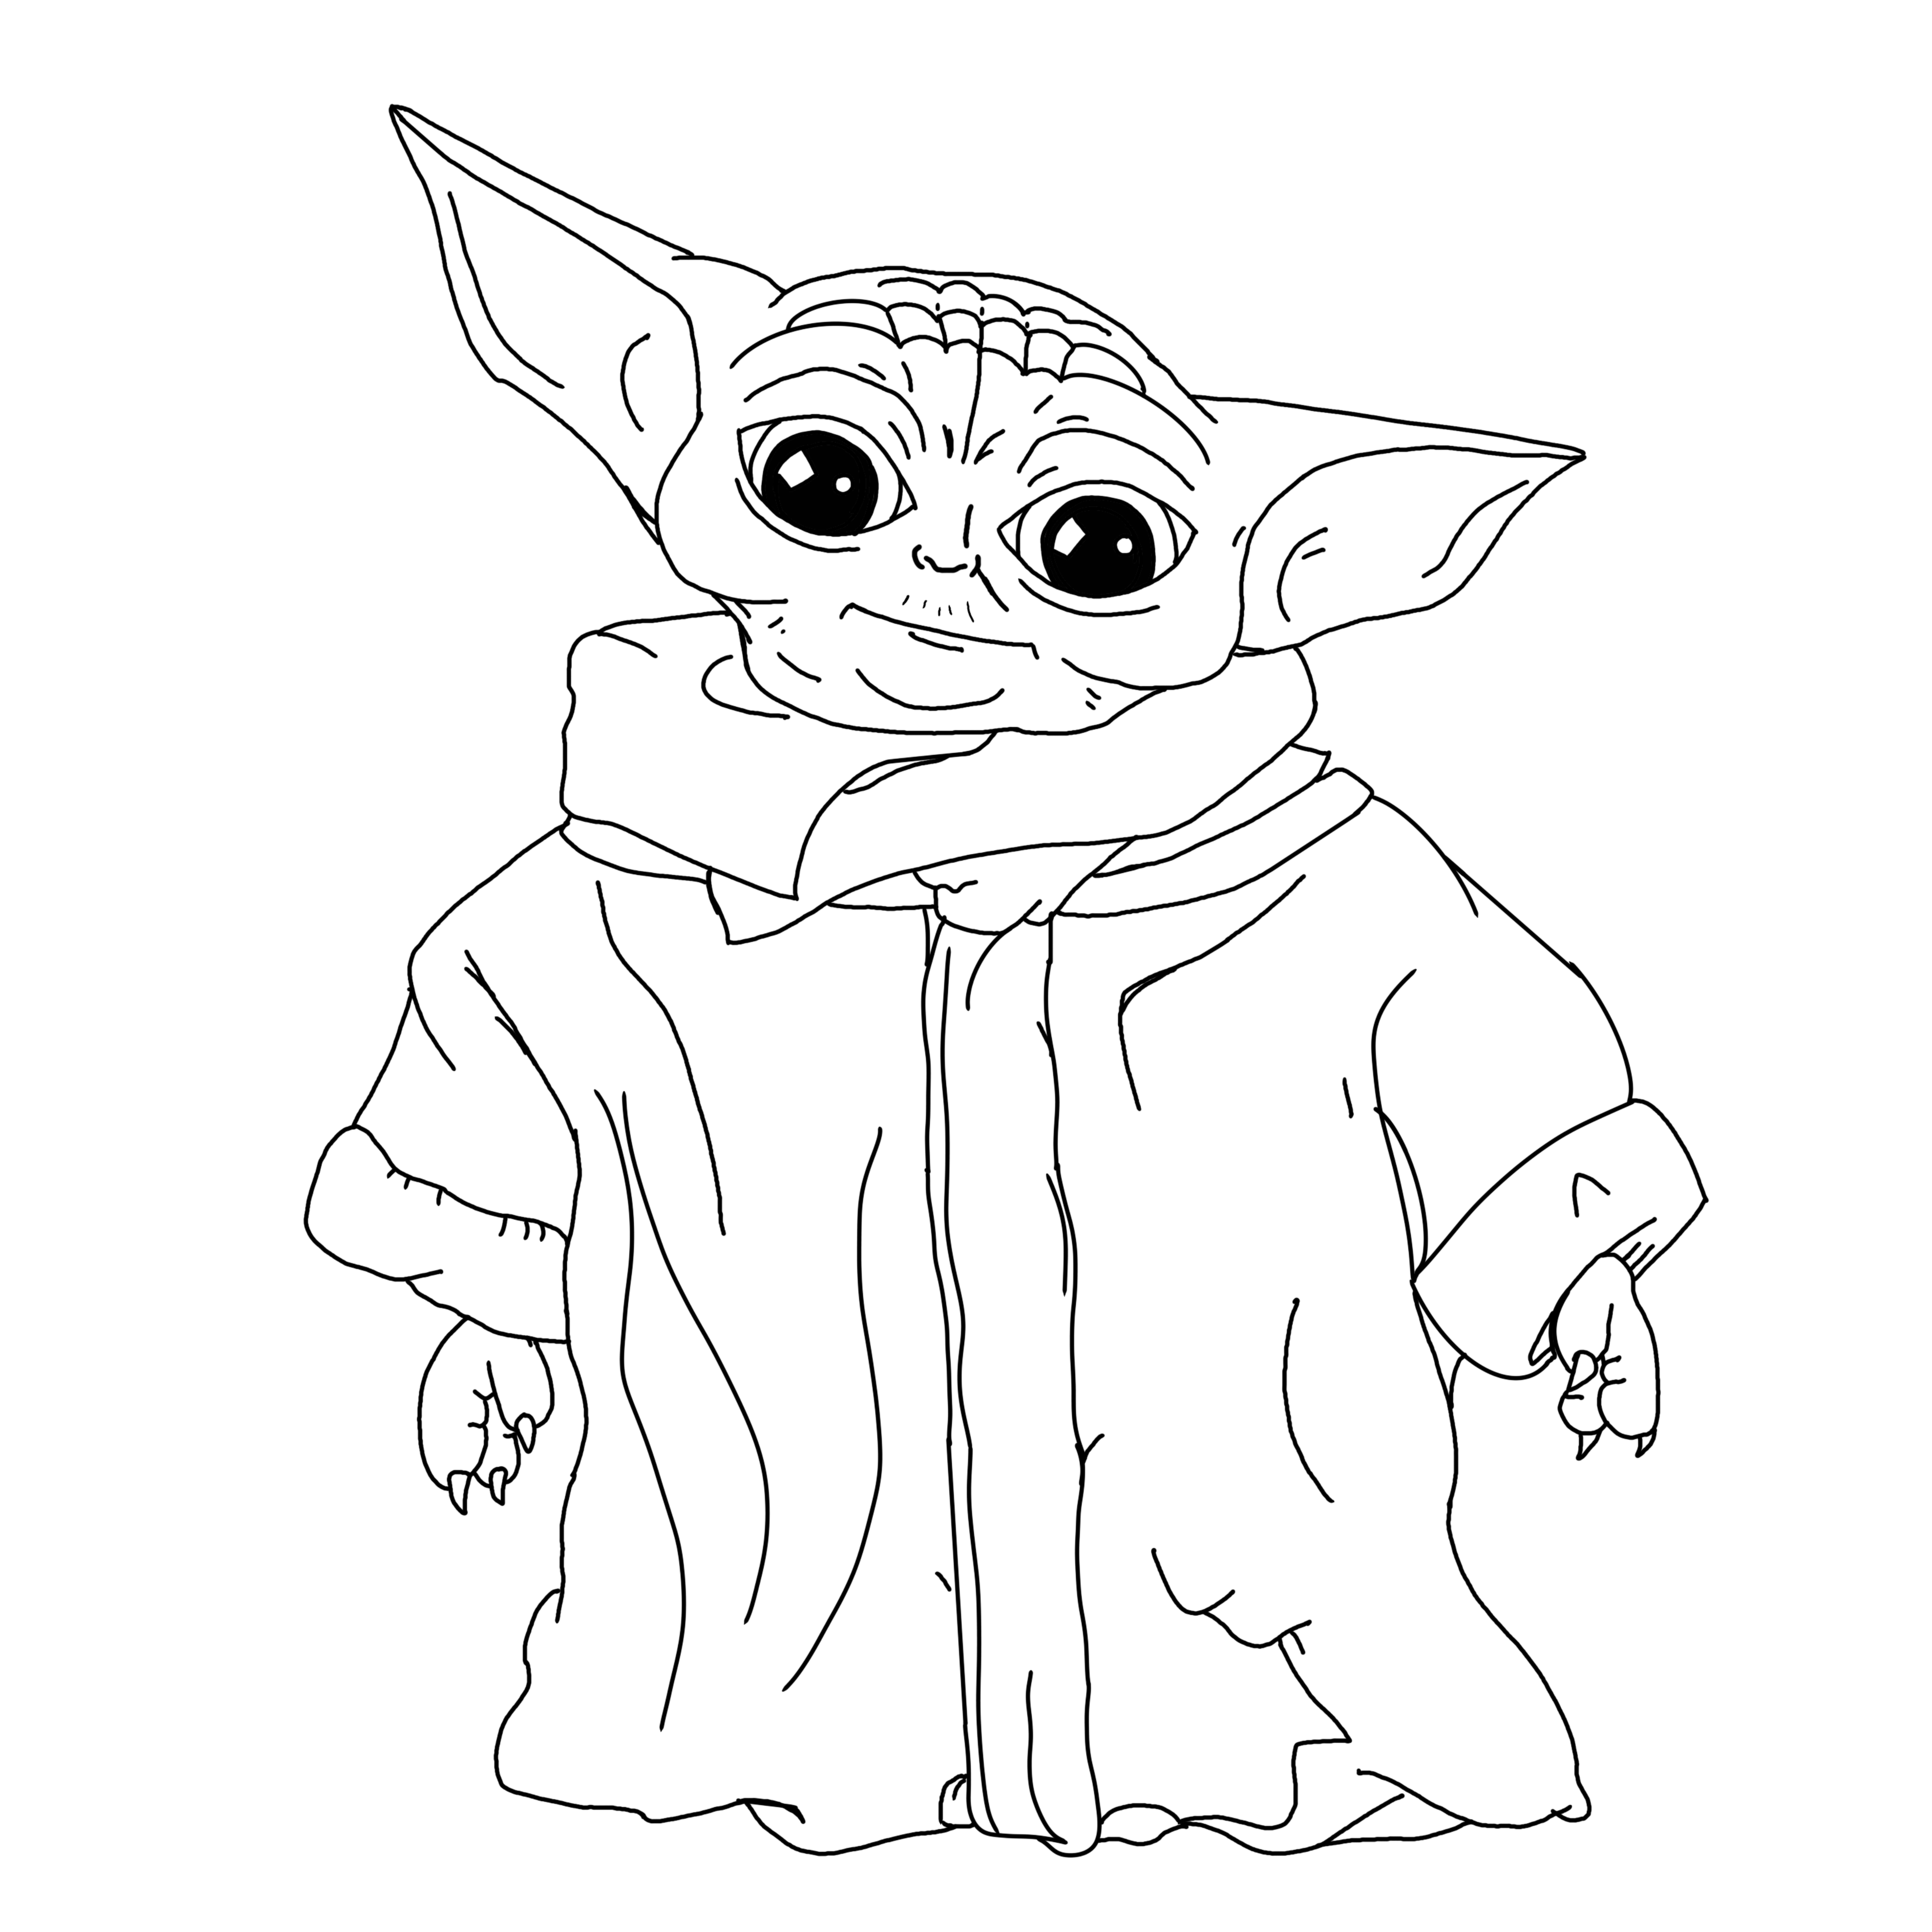 Grogu Coloring Pages   Best Coloring Pages For Kids